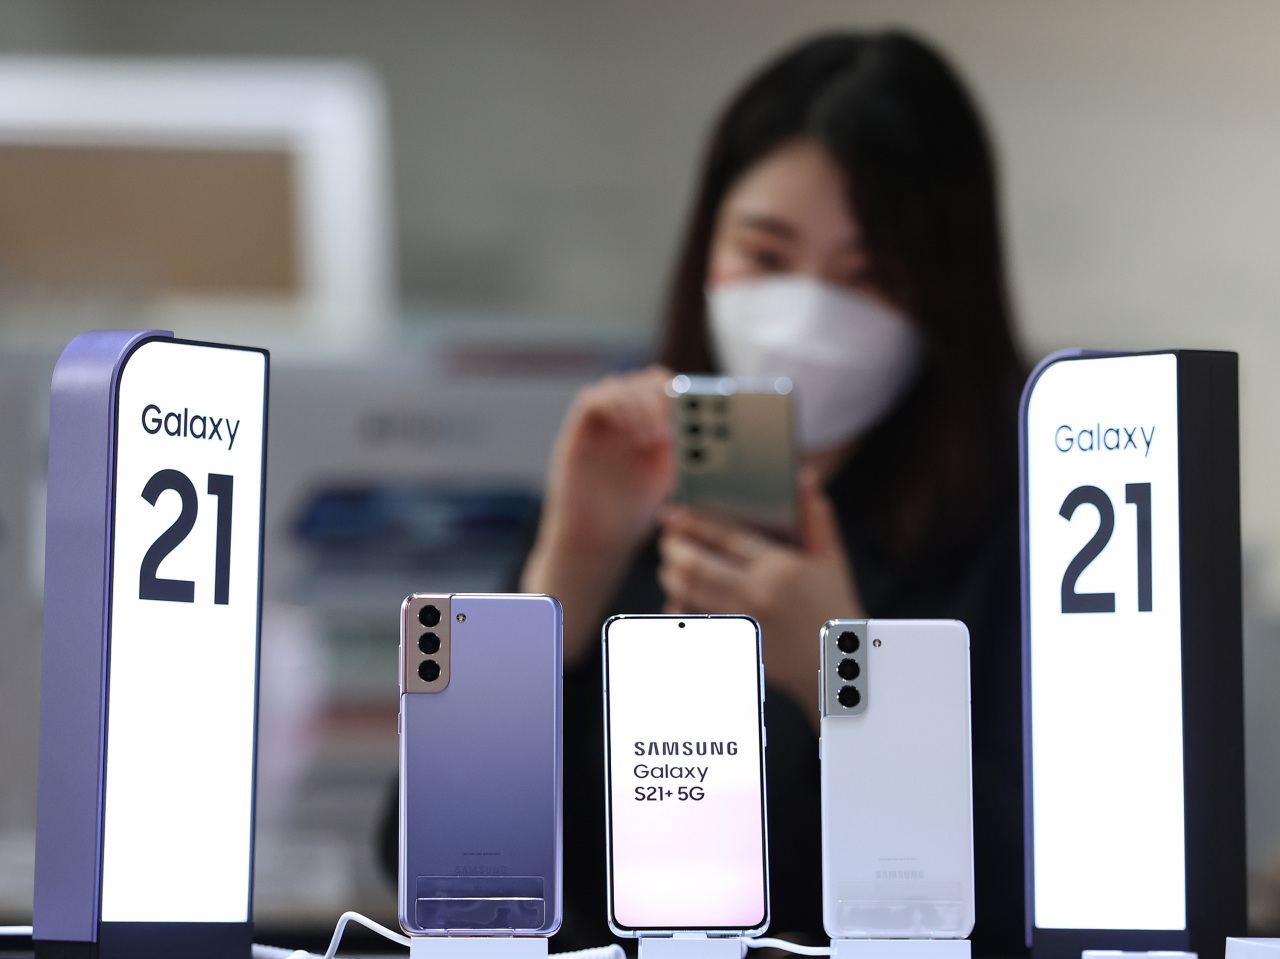 This photo taken Jan. 15, 2021, shows Samsung Electronics Co.'s Galaxy S21 smartphones displayed at a store in Seoul. (Yonhap)